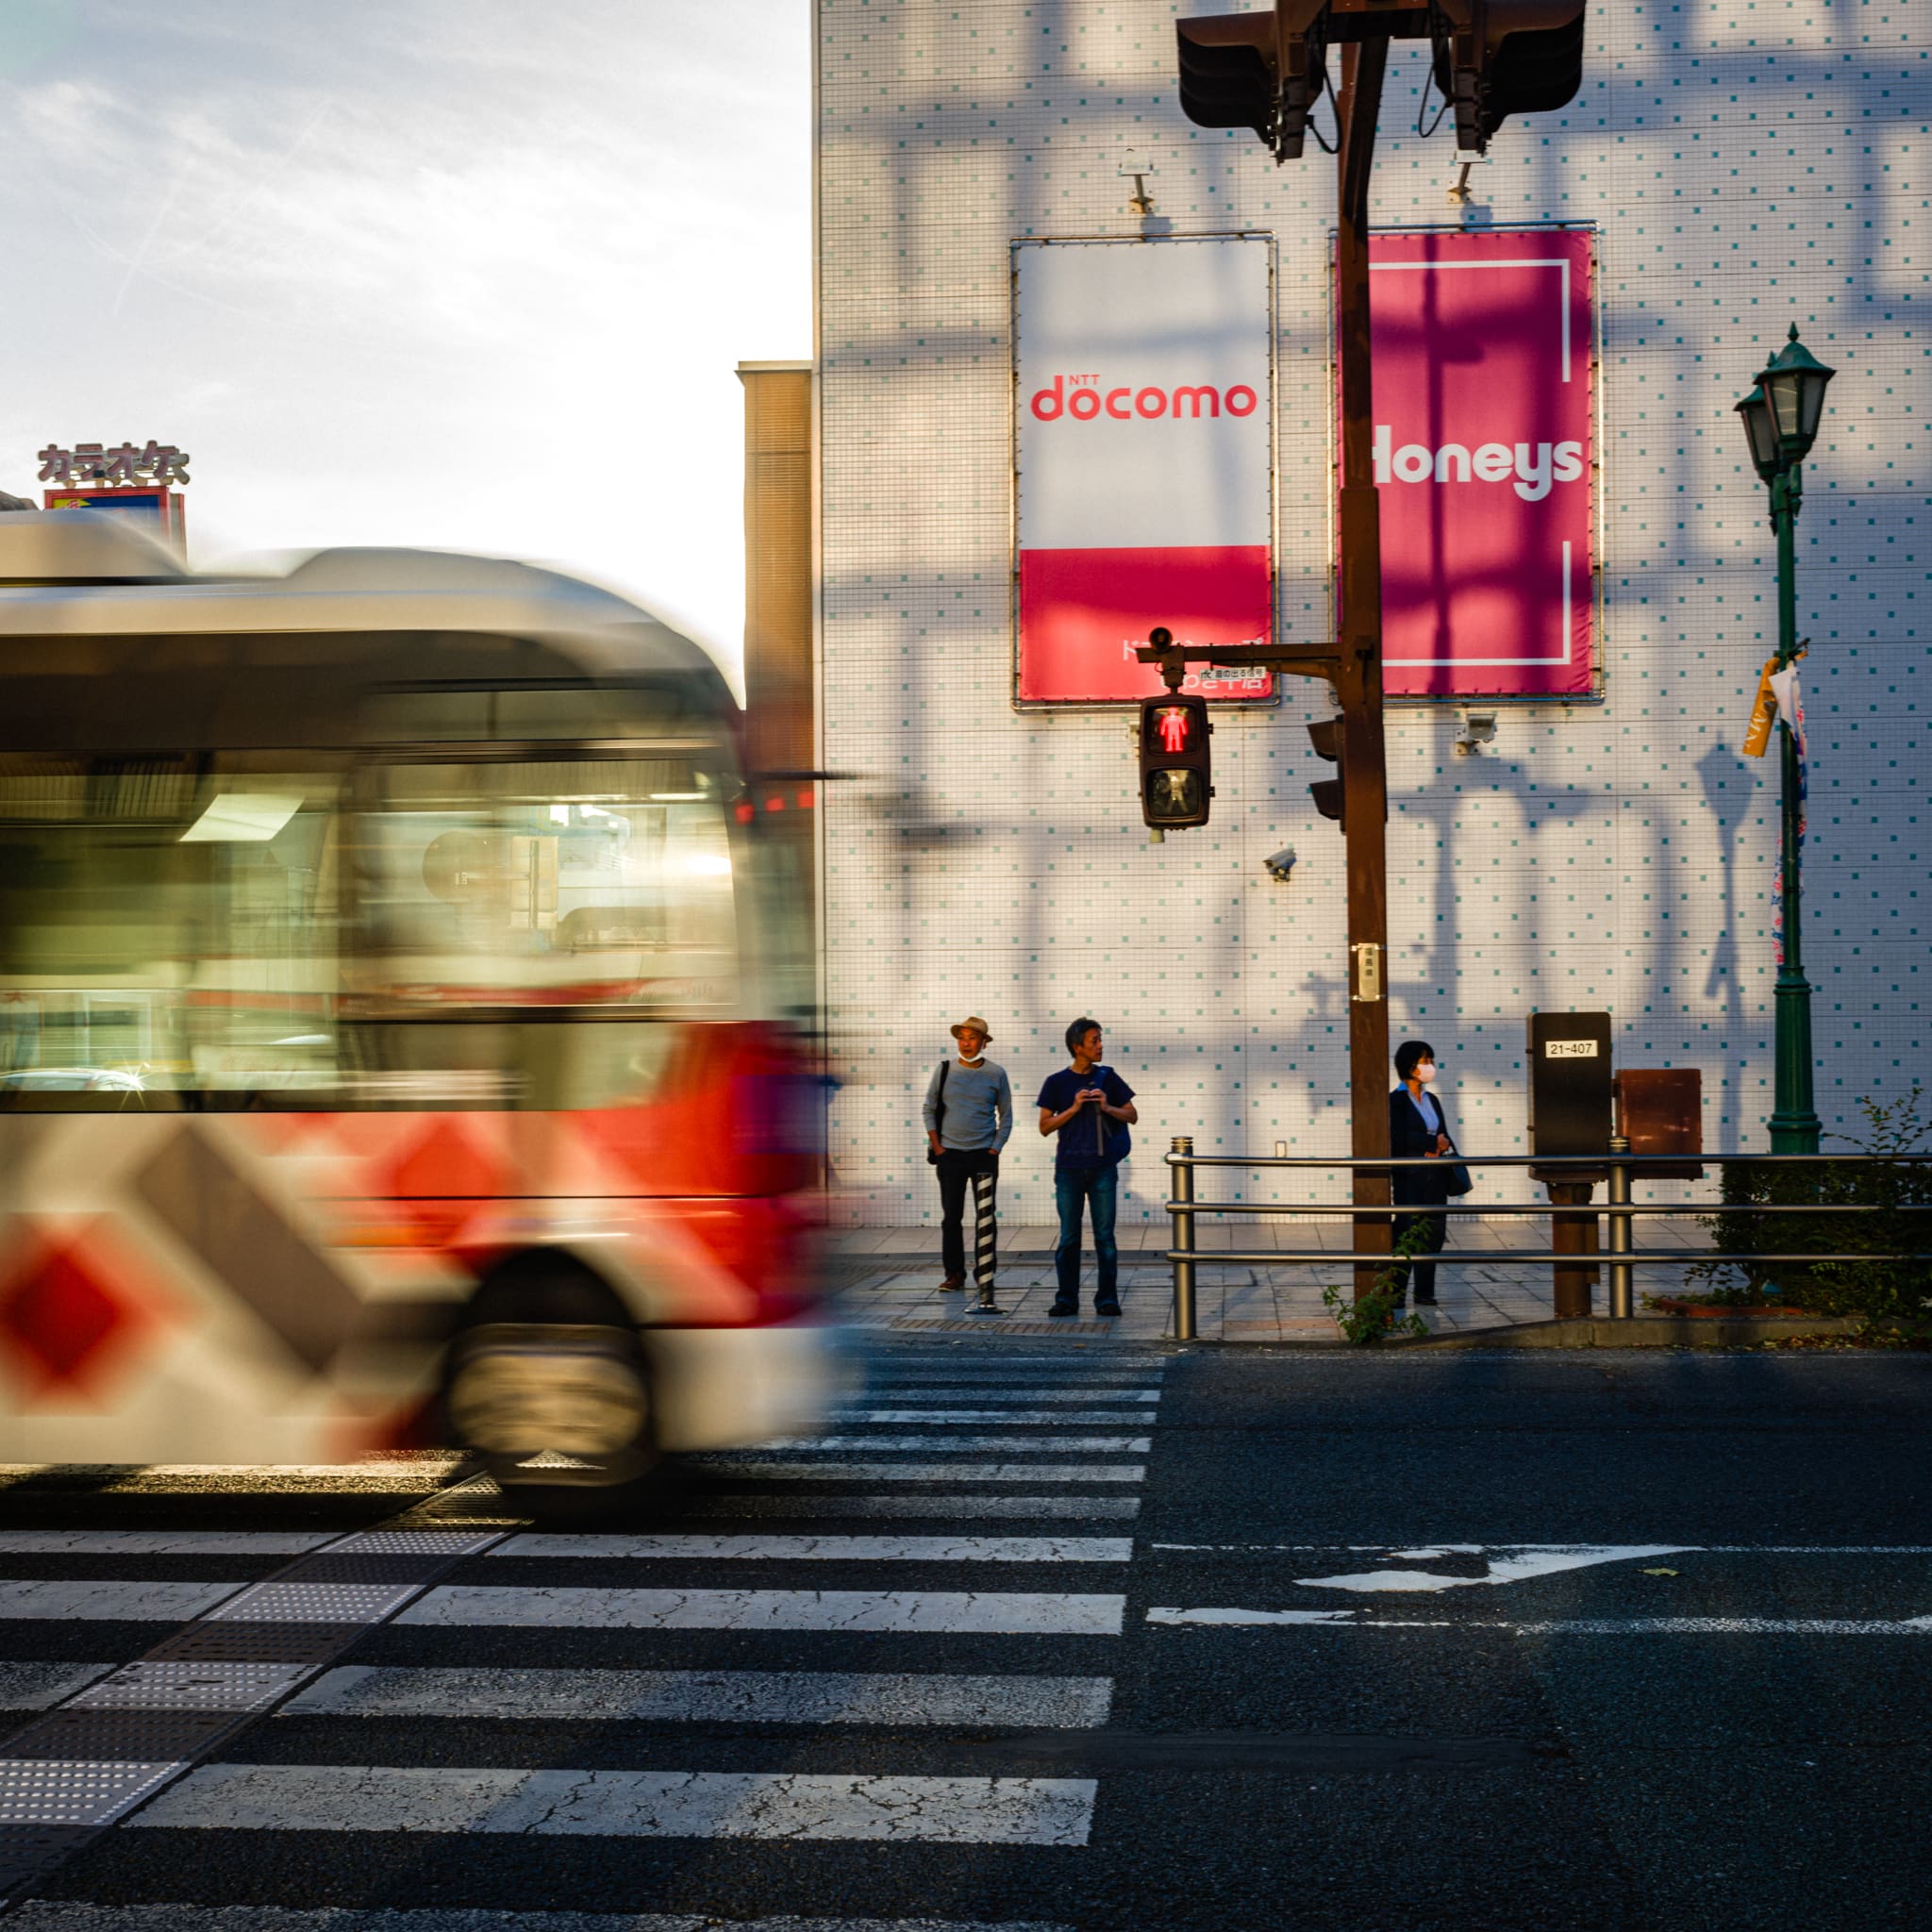 Fast-moving bus and pedestrians at a crosswalk during golden hour in a Japanese city.